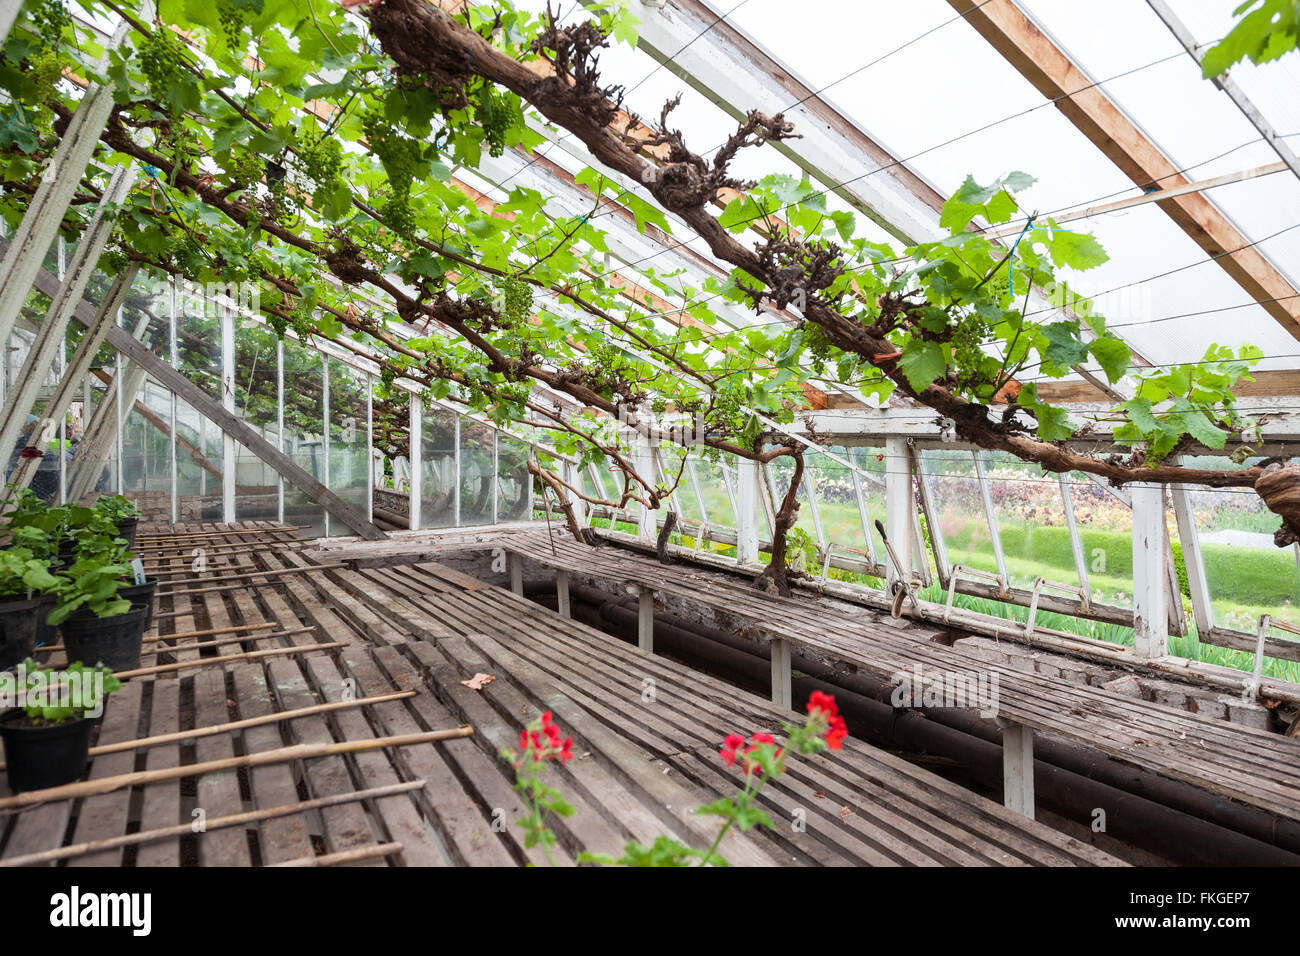 An old vine growing in a greenhouse or hothouse with bunches of grapes Stock Photo